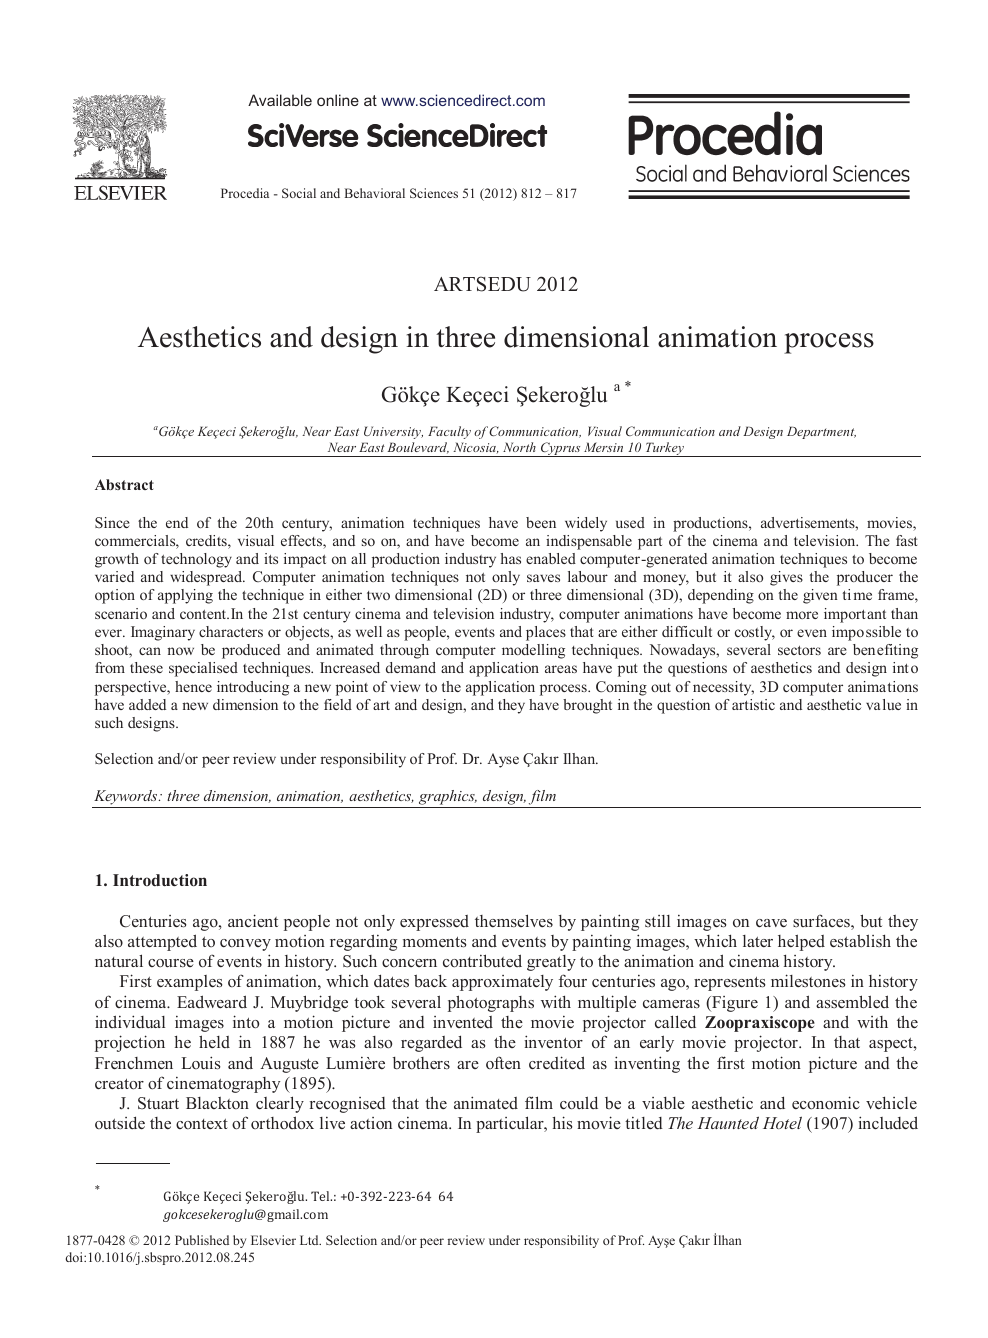 Aesthetics and Design in Three Dimensional Animation Process – topic of research  paper in Computer and information sciences. Download scholarly article PDF  and read for free on CyberLeninka open science hub.